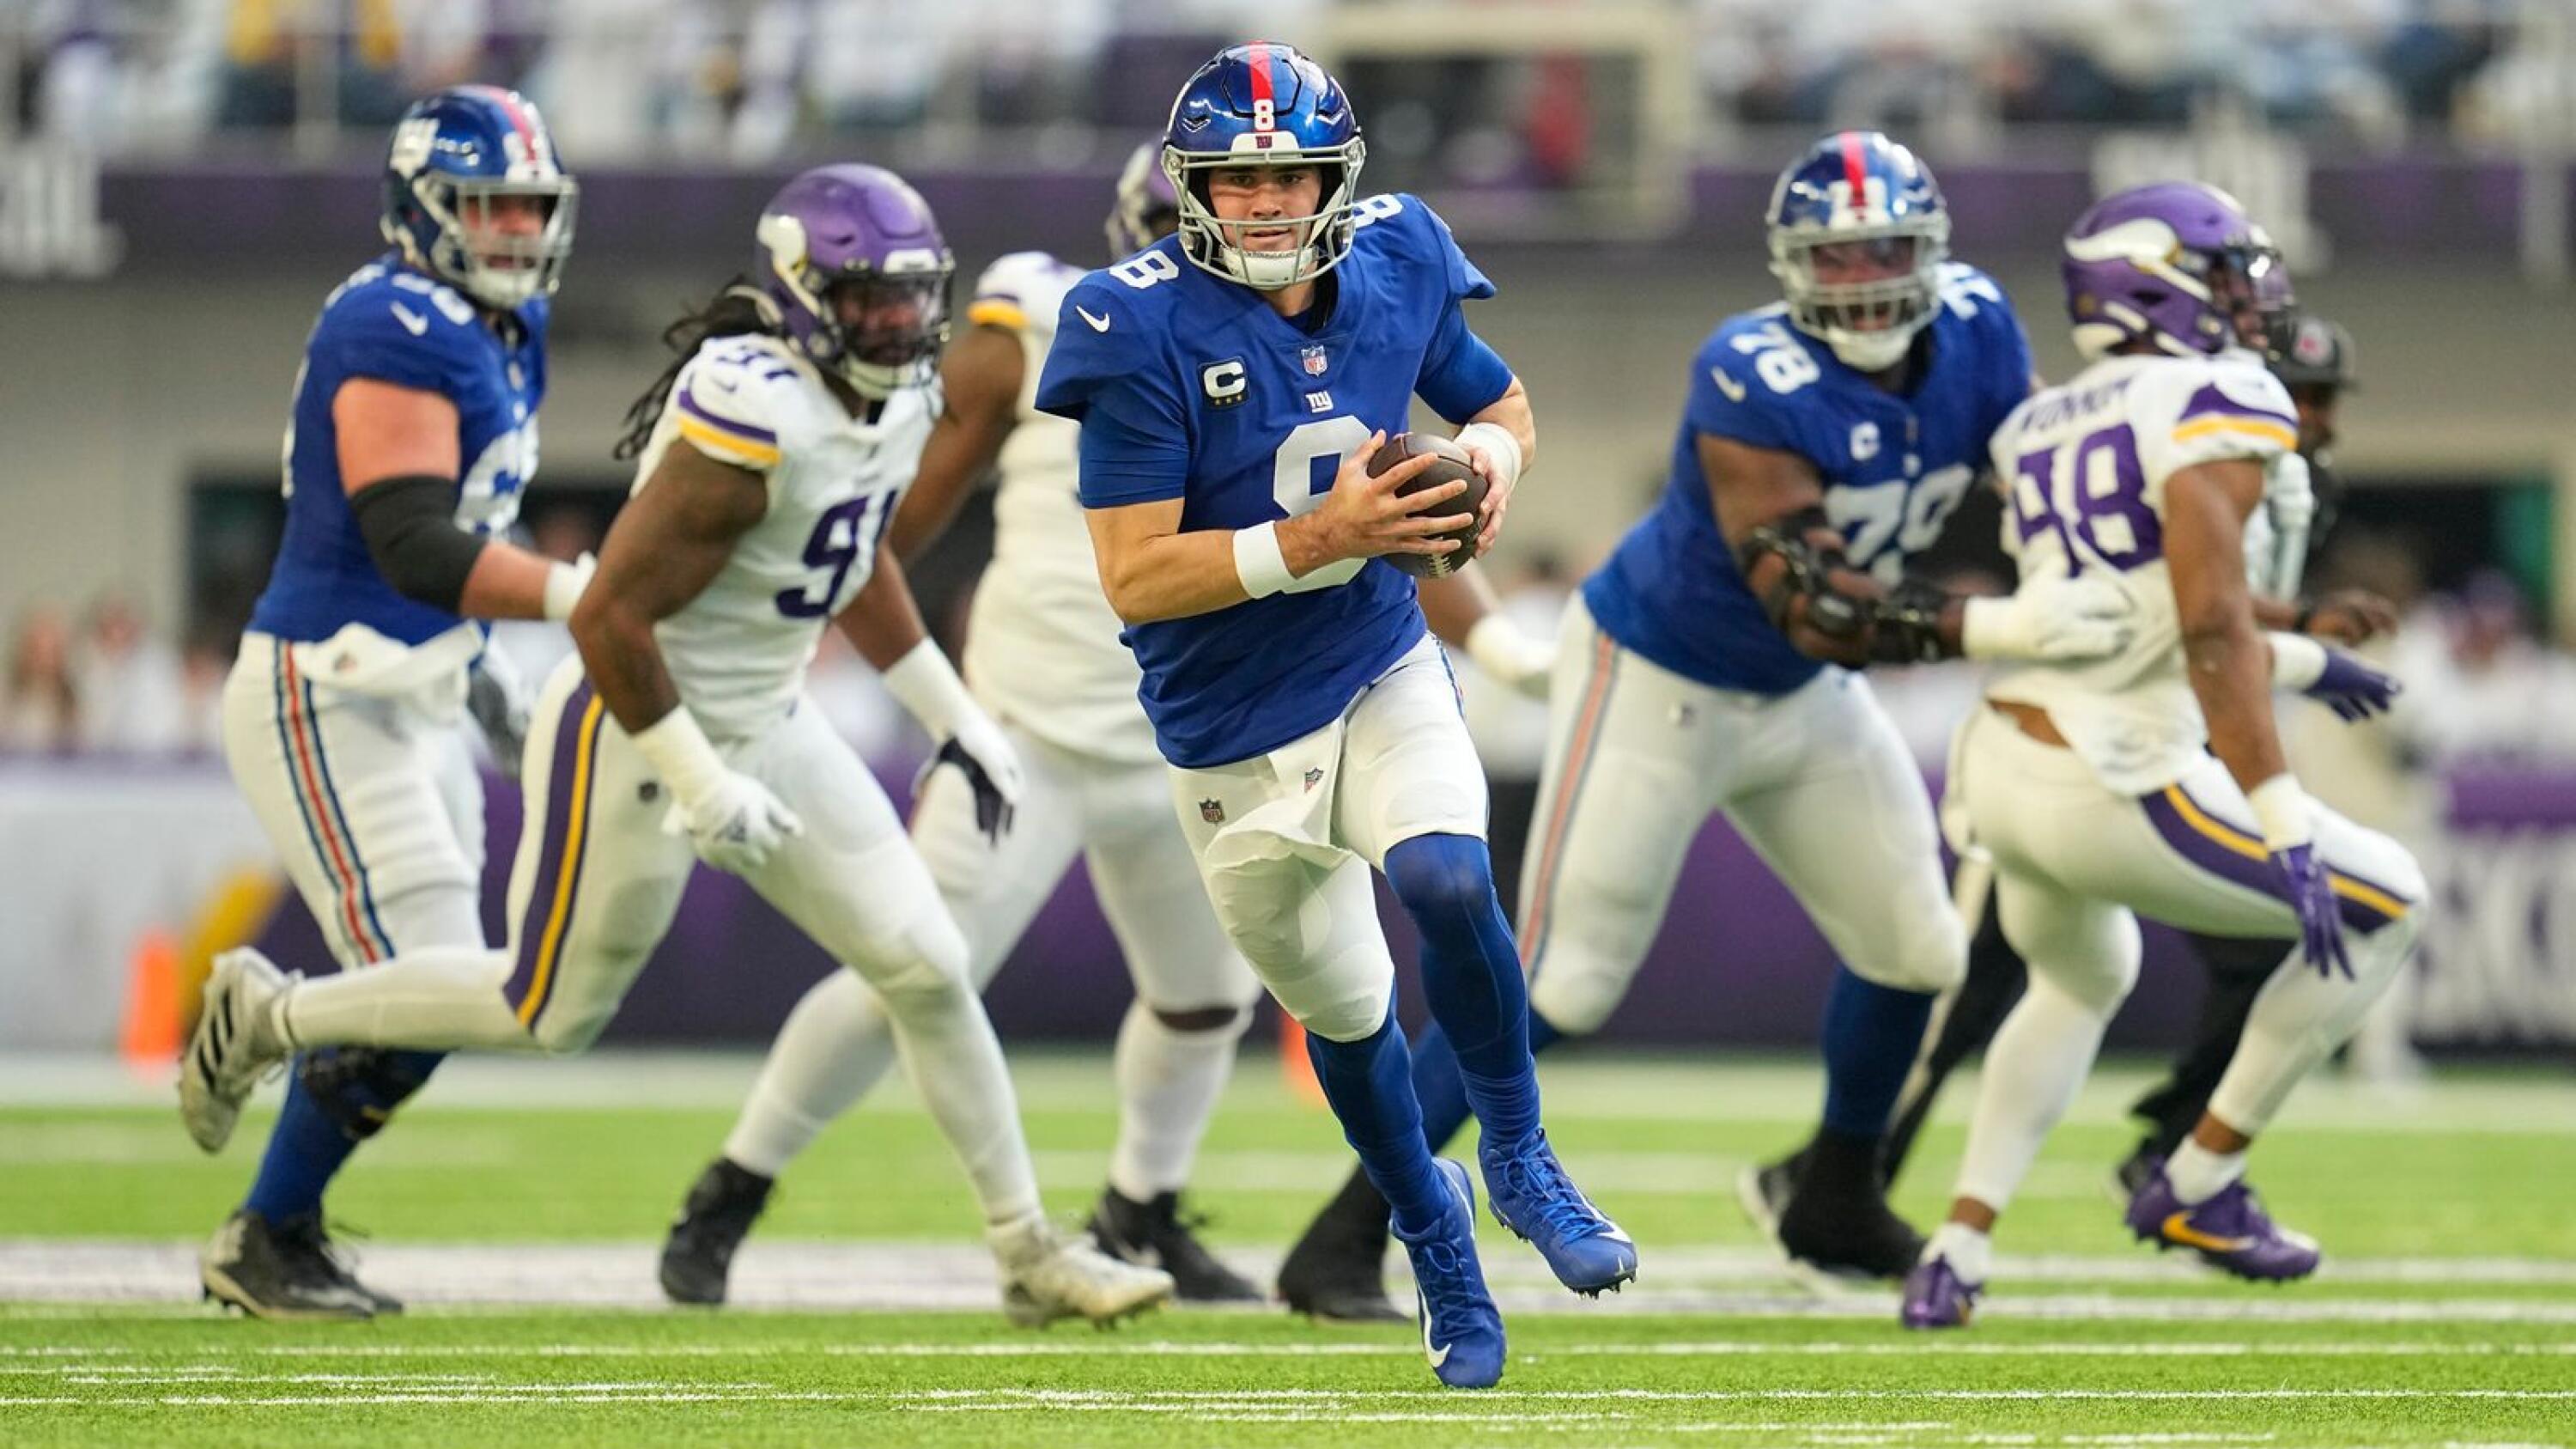 Vikings get upstart Giants in playoffs with 'do it now' view